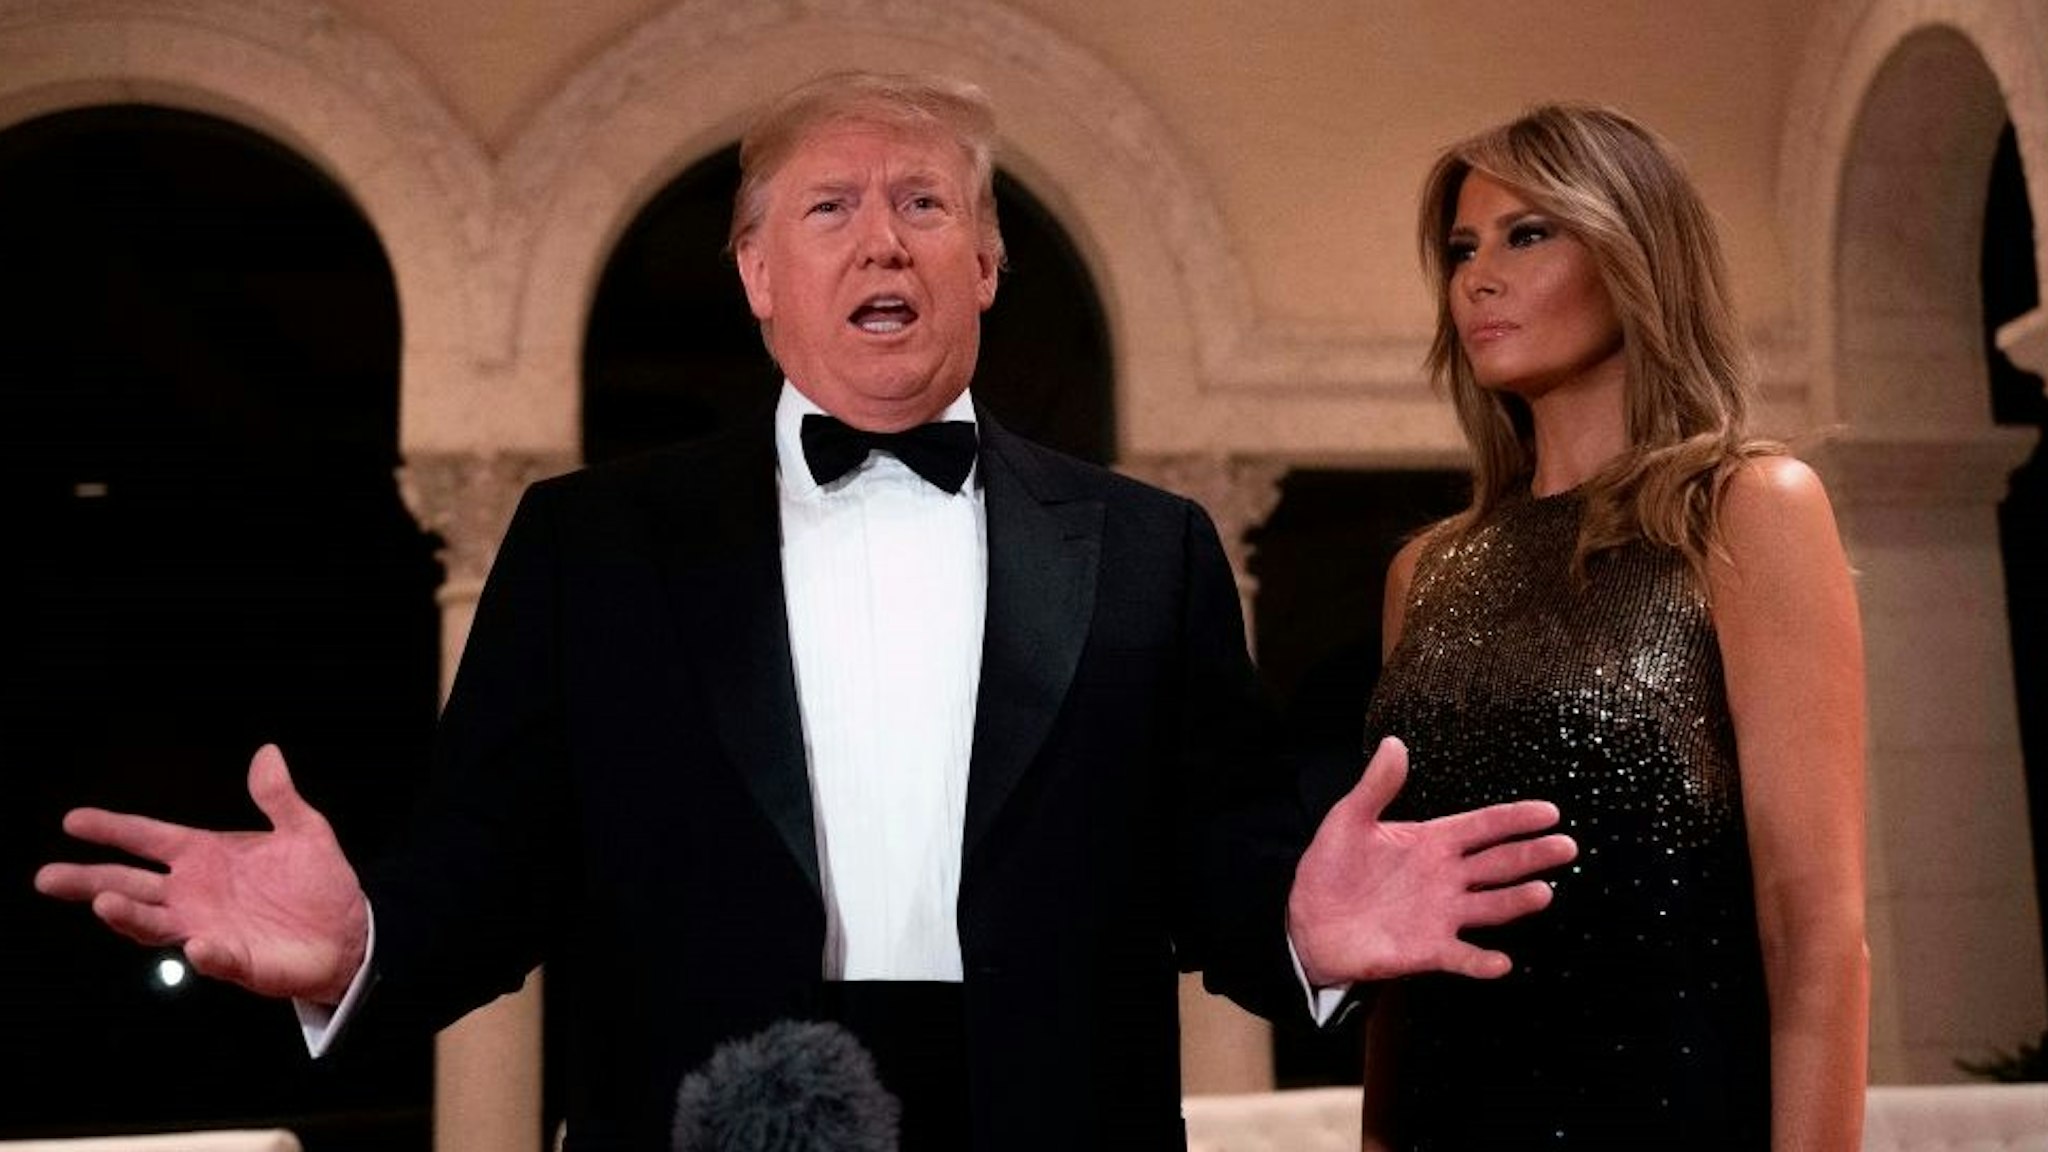 US President Donald Trump and First Lady Melania Trump speak to the press outside the grand ballroom as they arrive for a New Year's celebration at Mar-a-Lago in Palm Beach, Florida, on December 31, 2019. (Photo by JIM WATSON / AFP) (Photo by